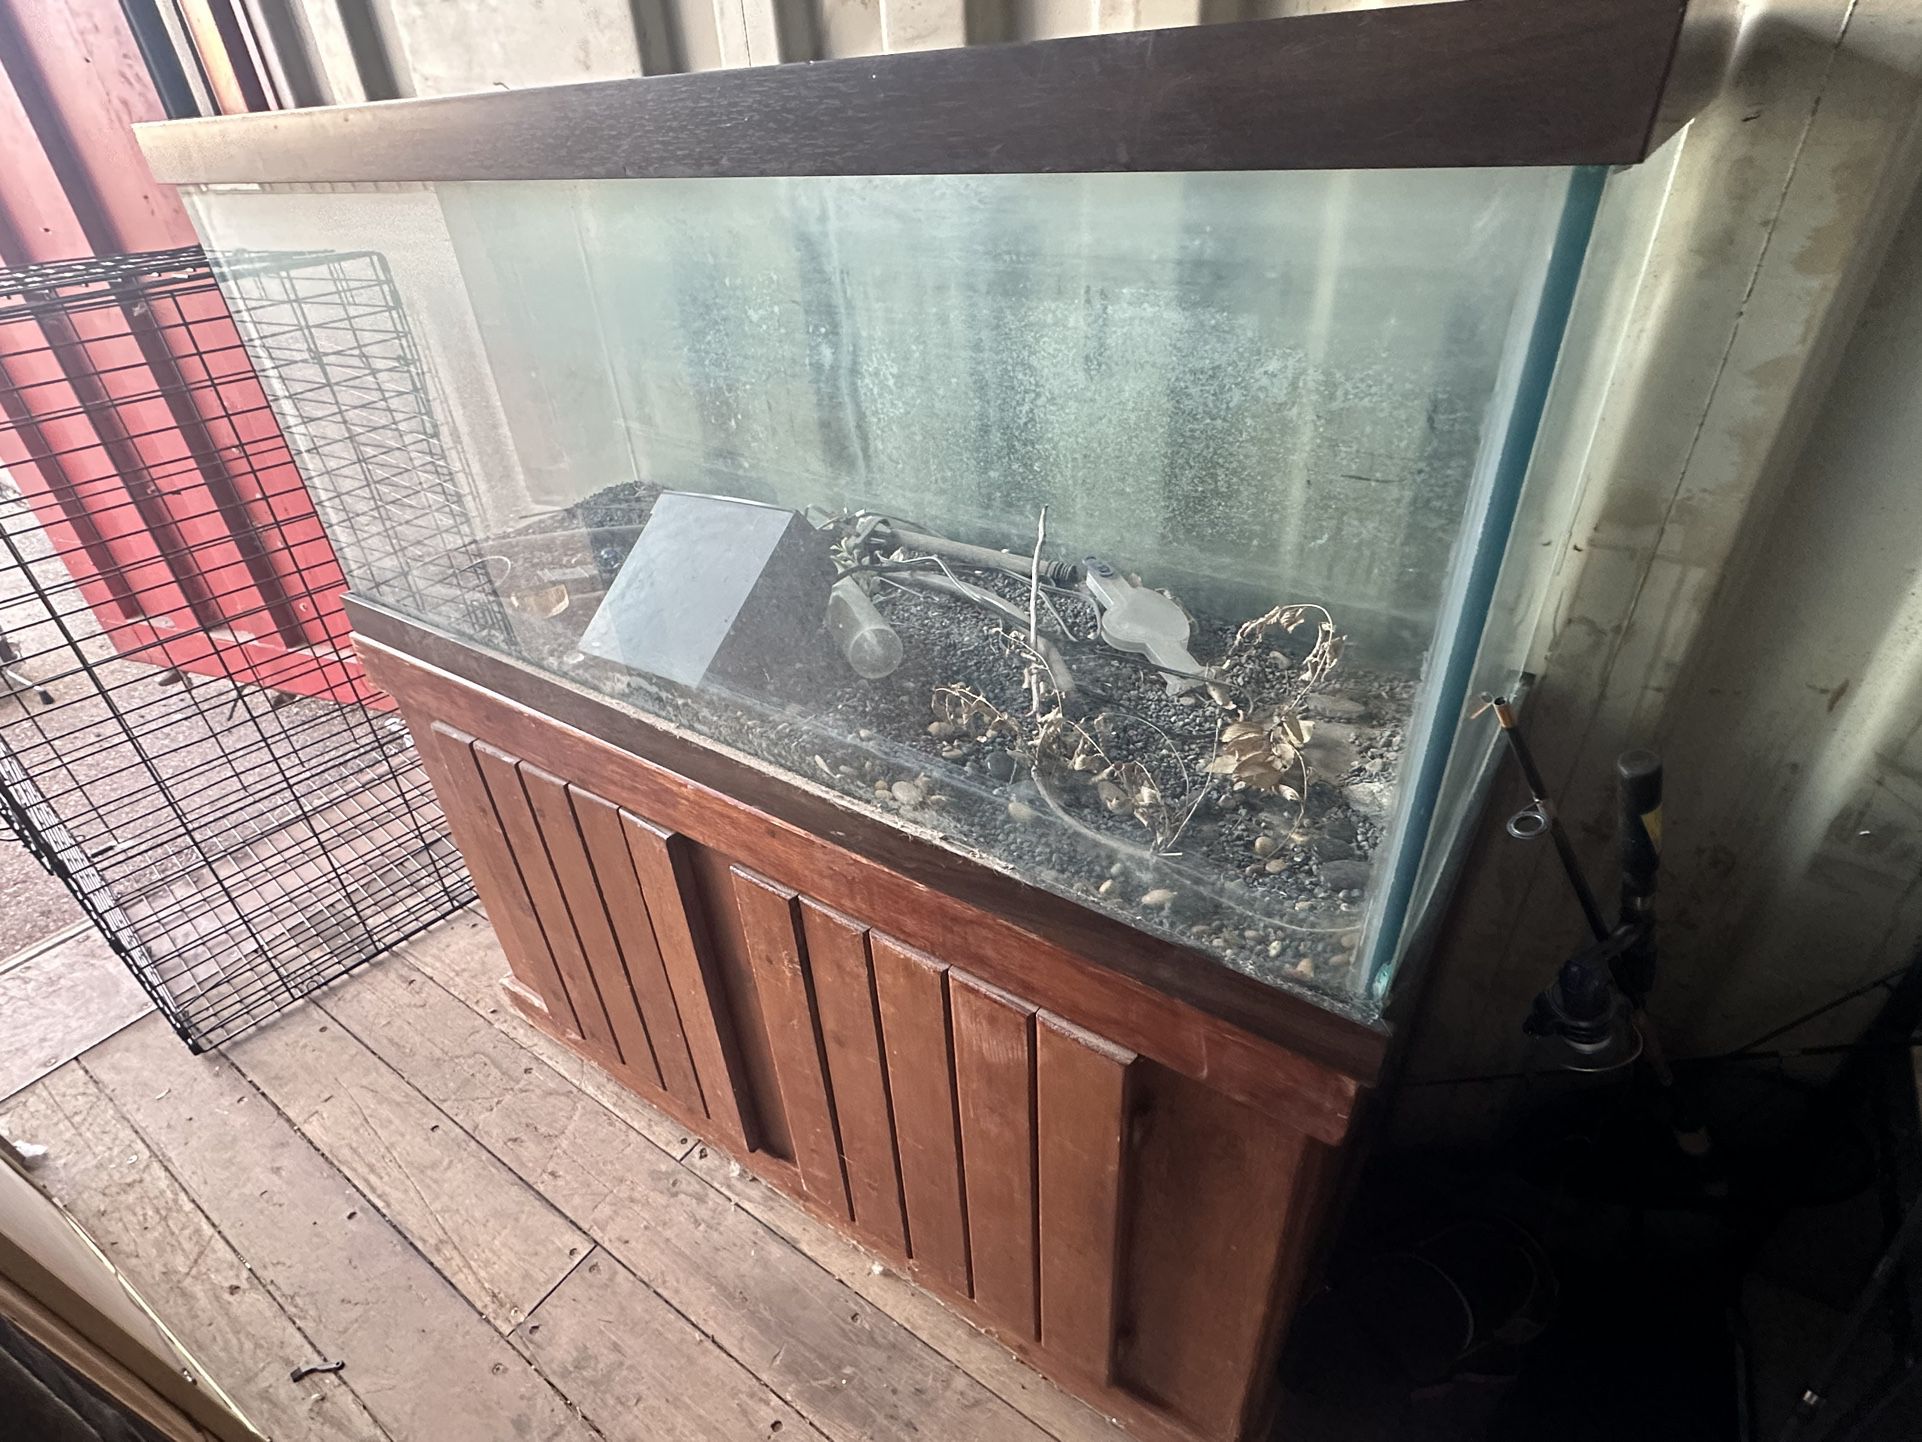 75 Gallon Fish Tank With Cabinet 